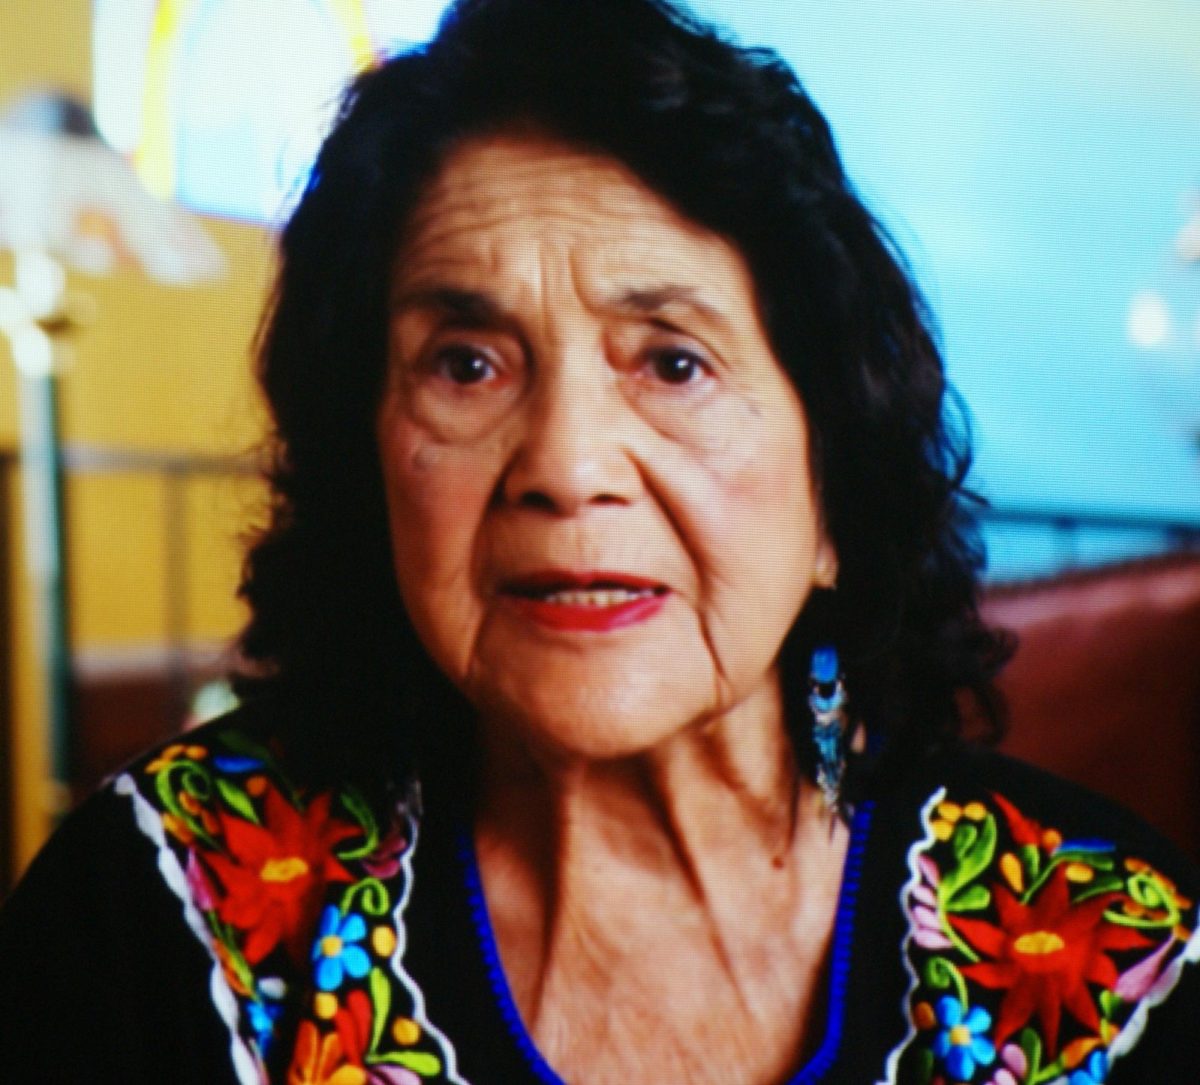 A+still+taken+from+the+documentary+Dolores+about+Mexican-American+leader+and+civil+rights+activist+Dolores+Huerta%2C+93%2C+the+photo+was+taken+from+the+screen+on+Wednesday%2C+Sept.+27.+%28Courtesy+of+Alexis+Ponce%29